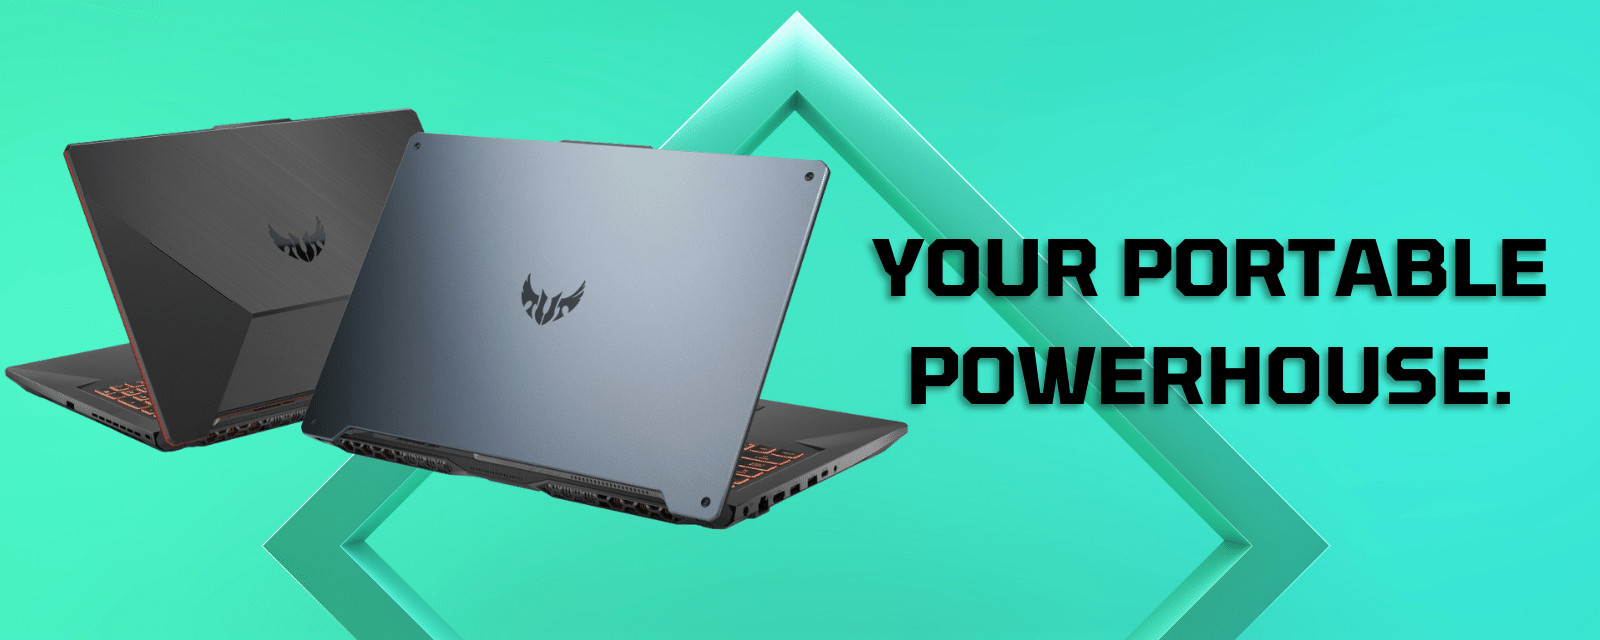 Gaming Laptops The definite option when you want to be productive or score headshots while on the move. Aim for perfection by relying on amazing laptops.